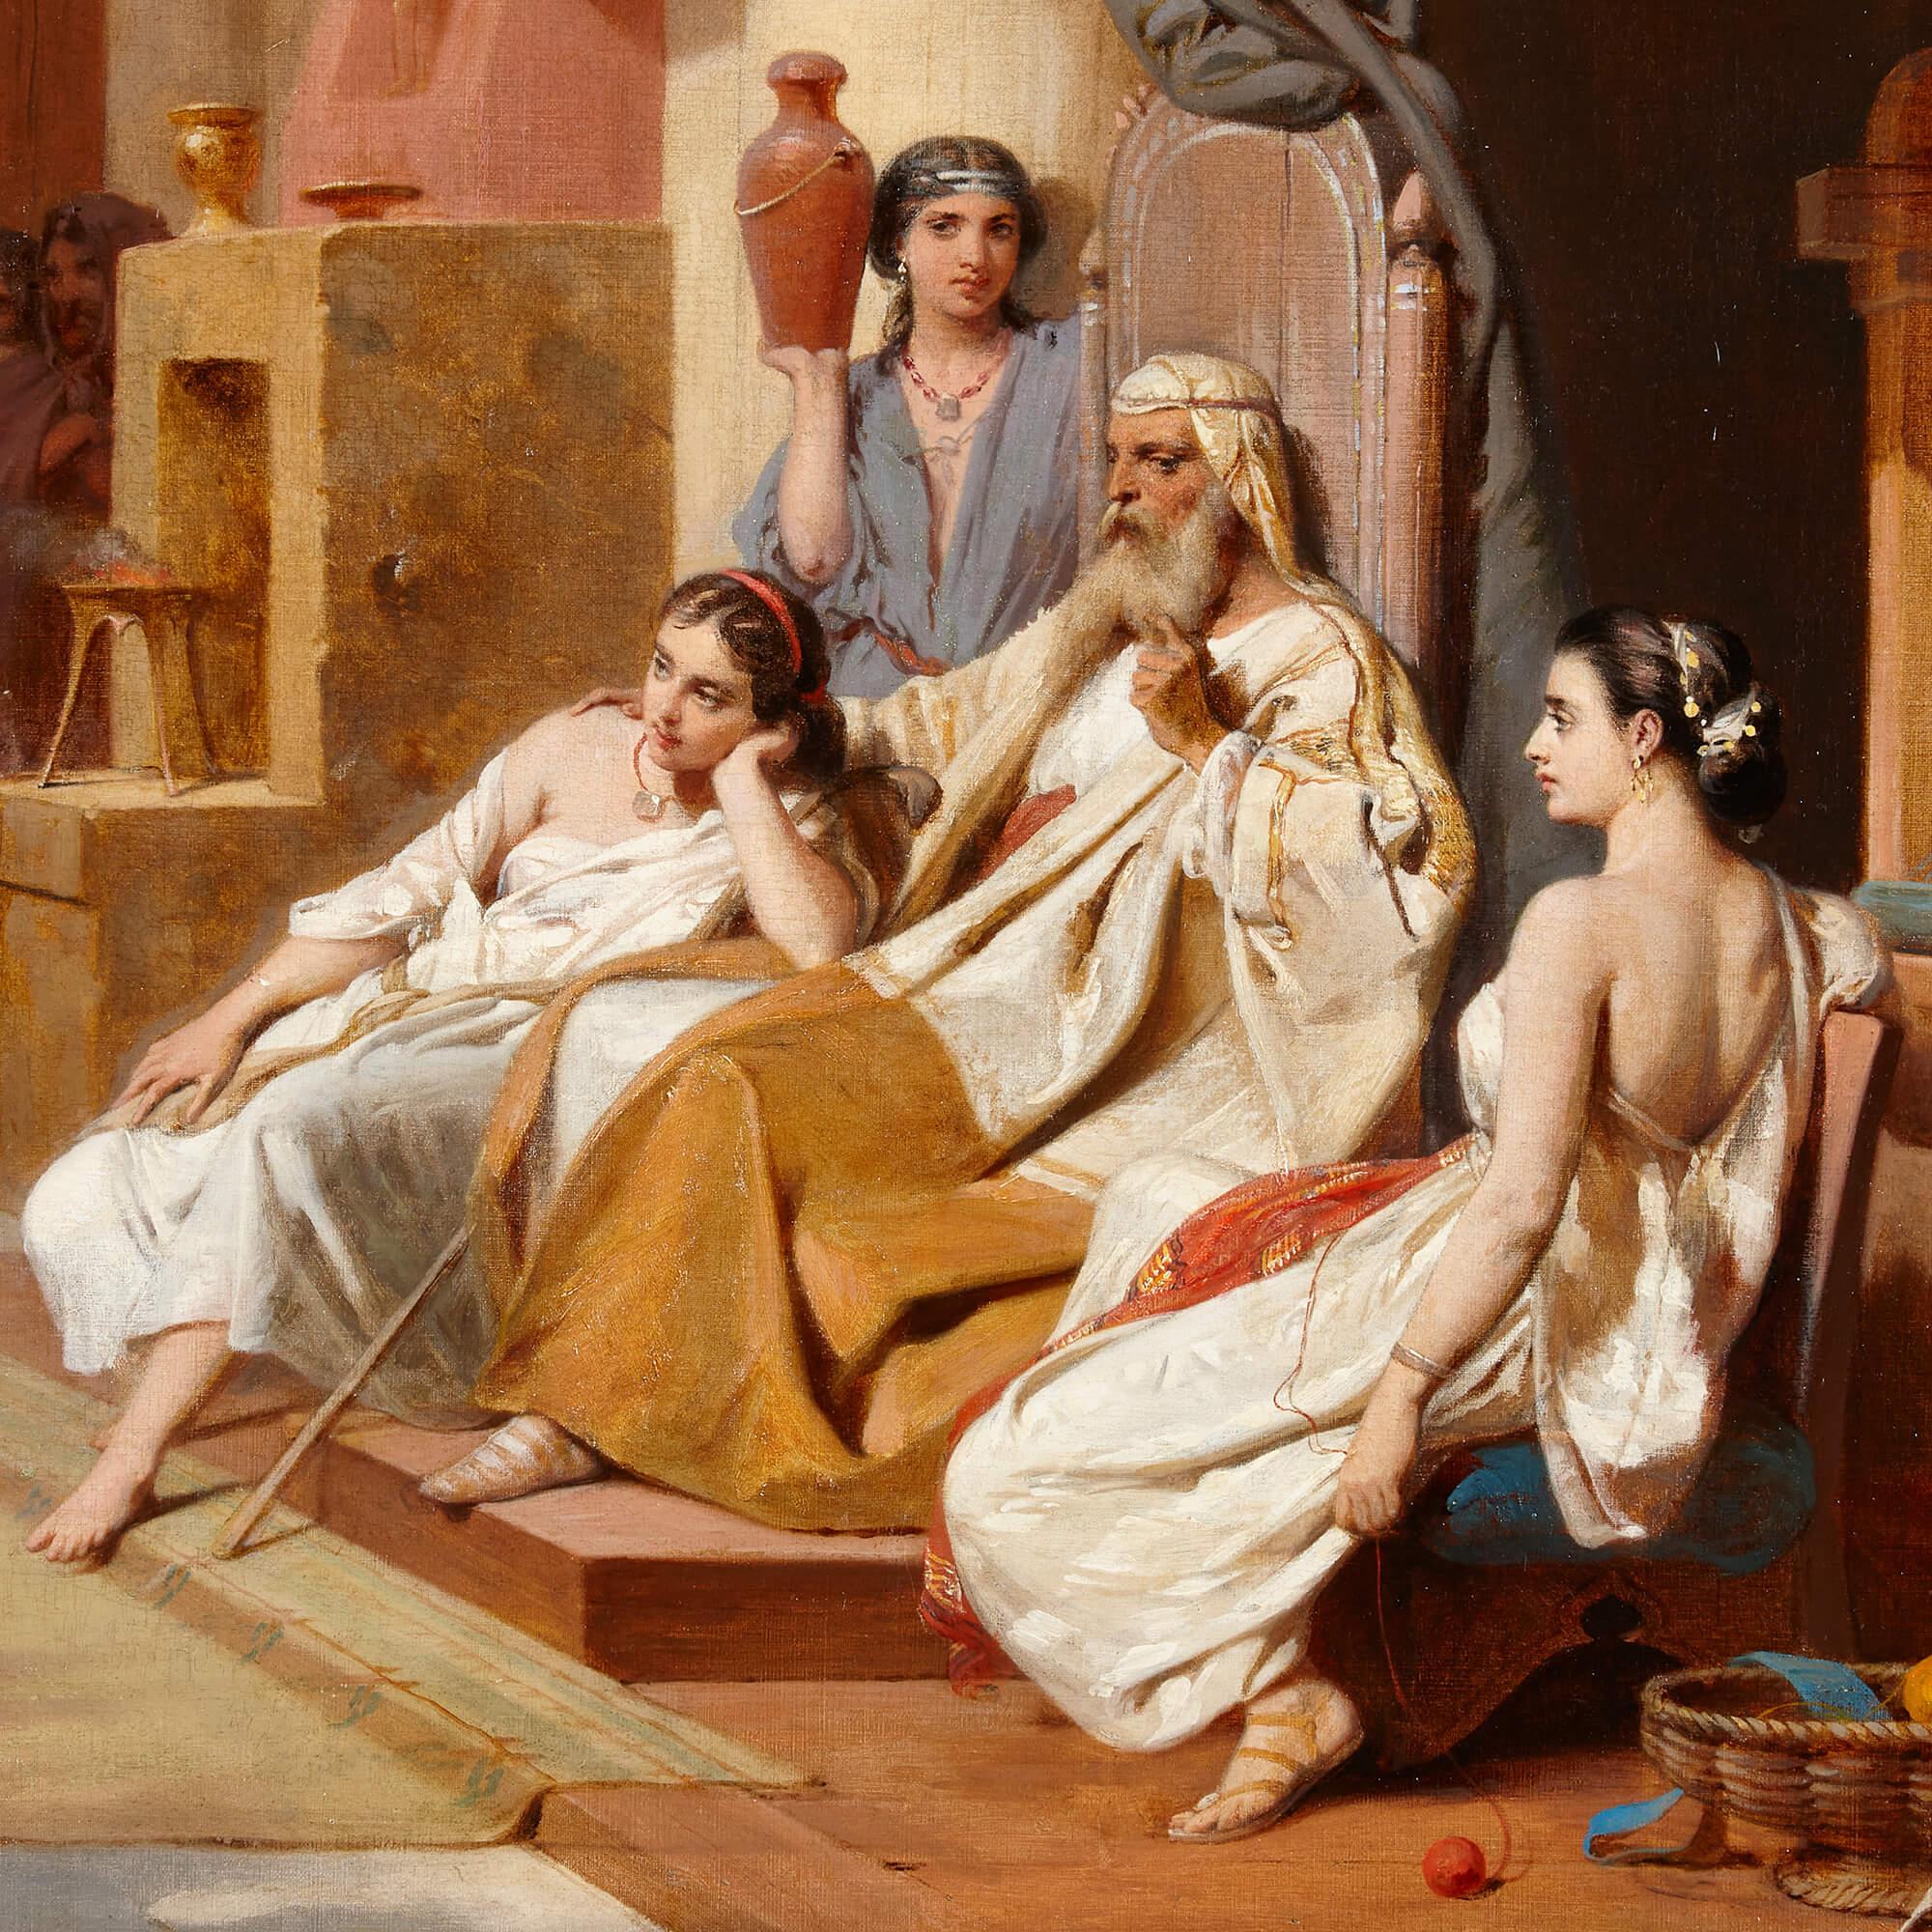 A large French Orientalist Biblical painting by H.F. Schopin
Oil-on-canvas, 1868
Frame: Height 72cm, width 95cm, depth 7cm
Canvas: Height 57cm, width 80cm

This wonderful Orientalist painting is by the French artist Henri Frédéric Schopin